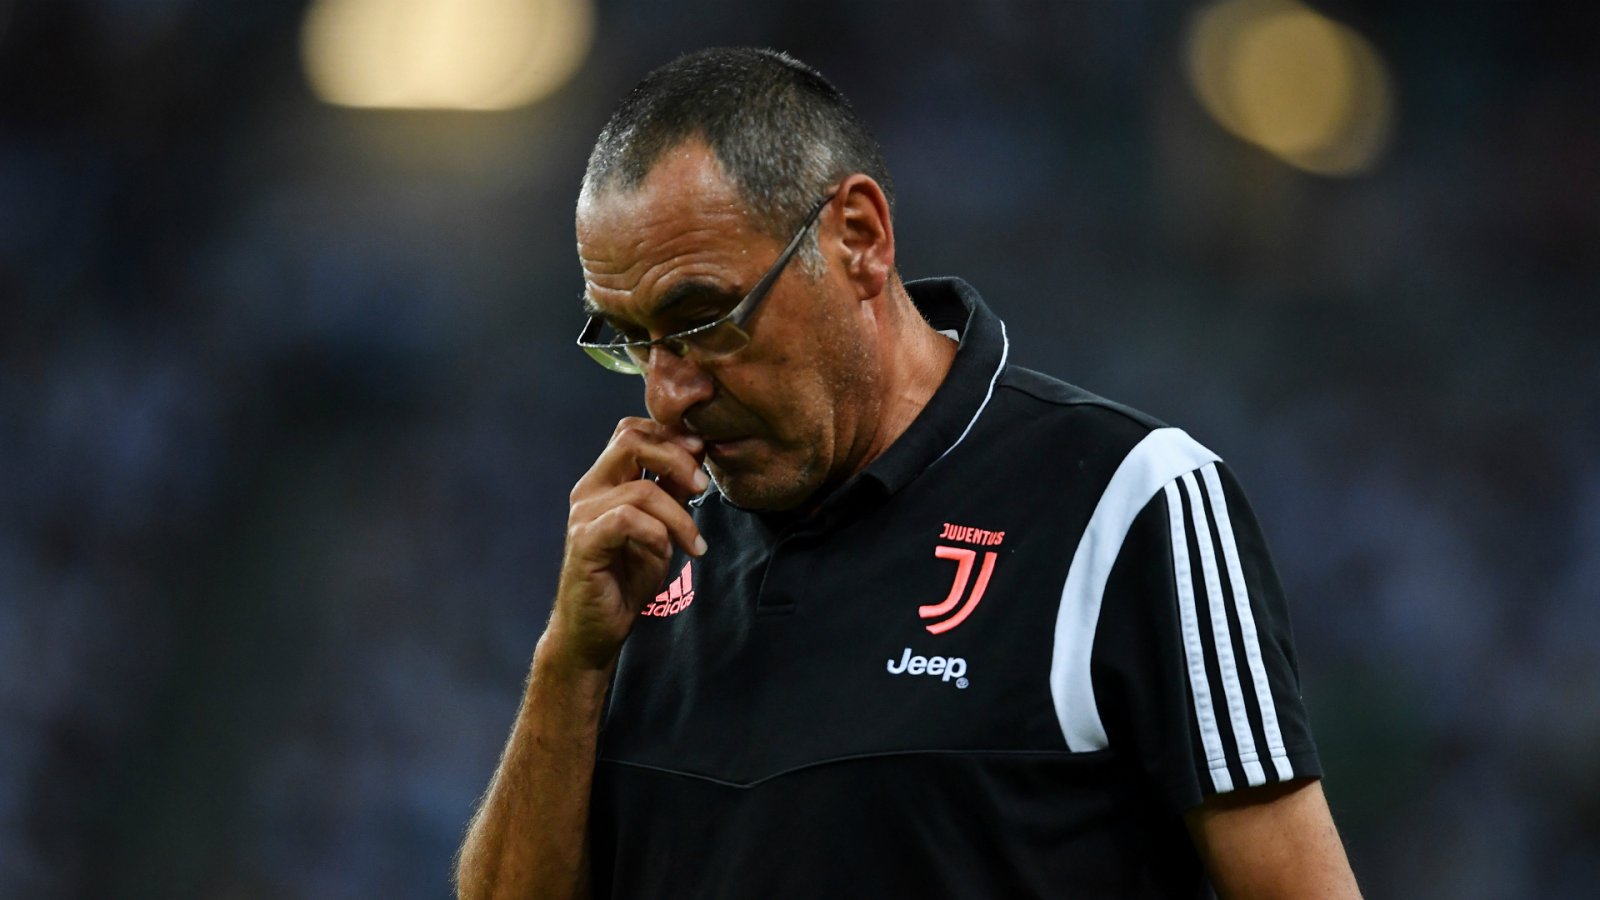 Just In : Juventus sack Maurizio Sarri after Champions League exit! Details 👇 1